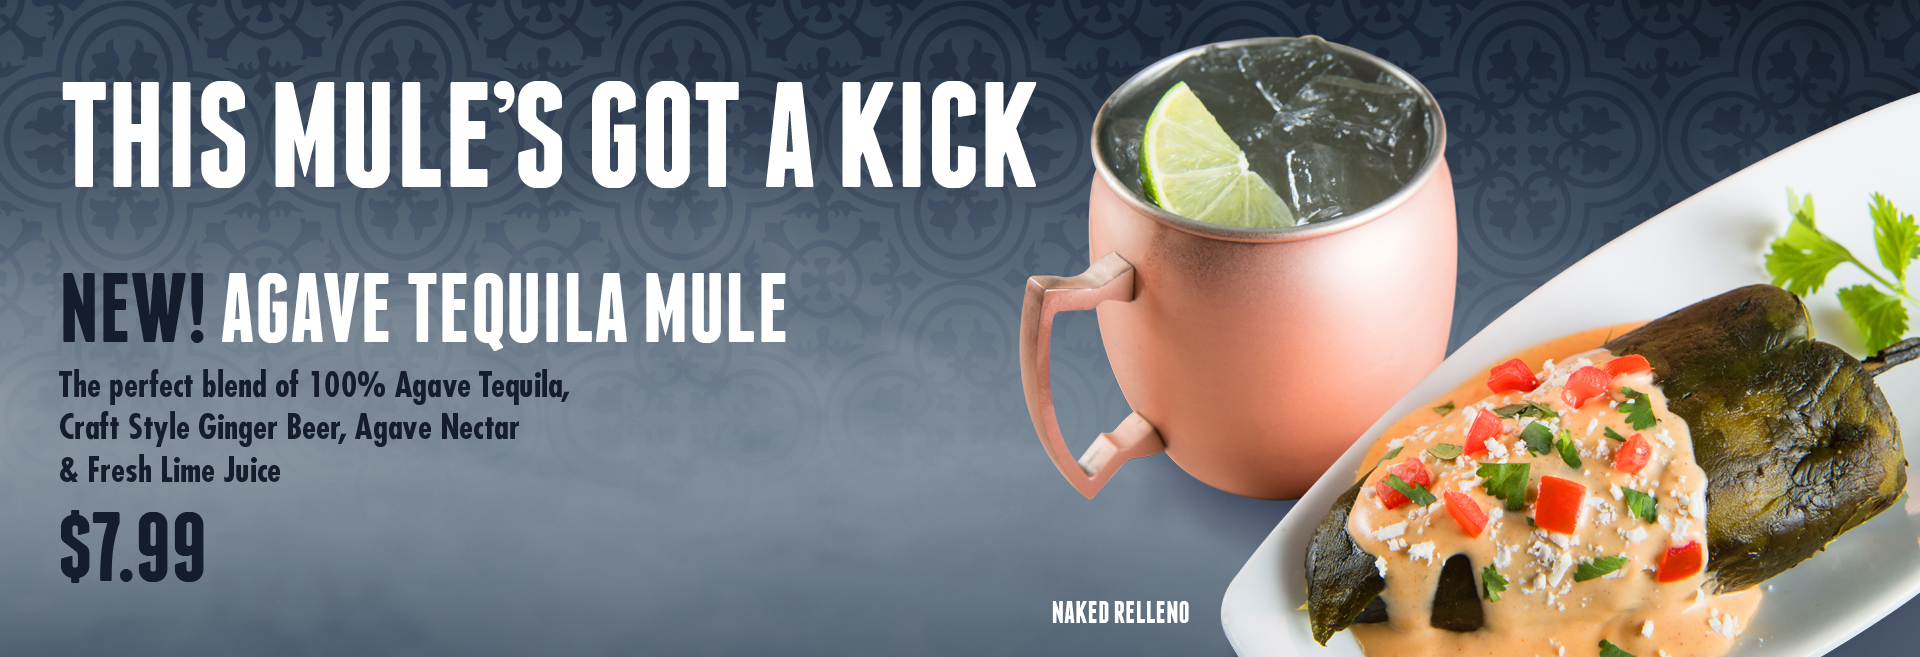 Miguel's Restaurant Agave Tequila Mule Drink Specials